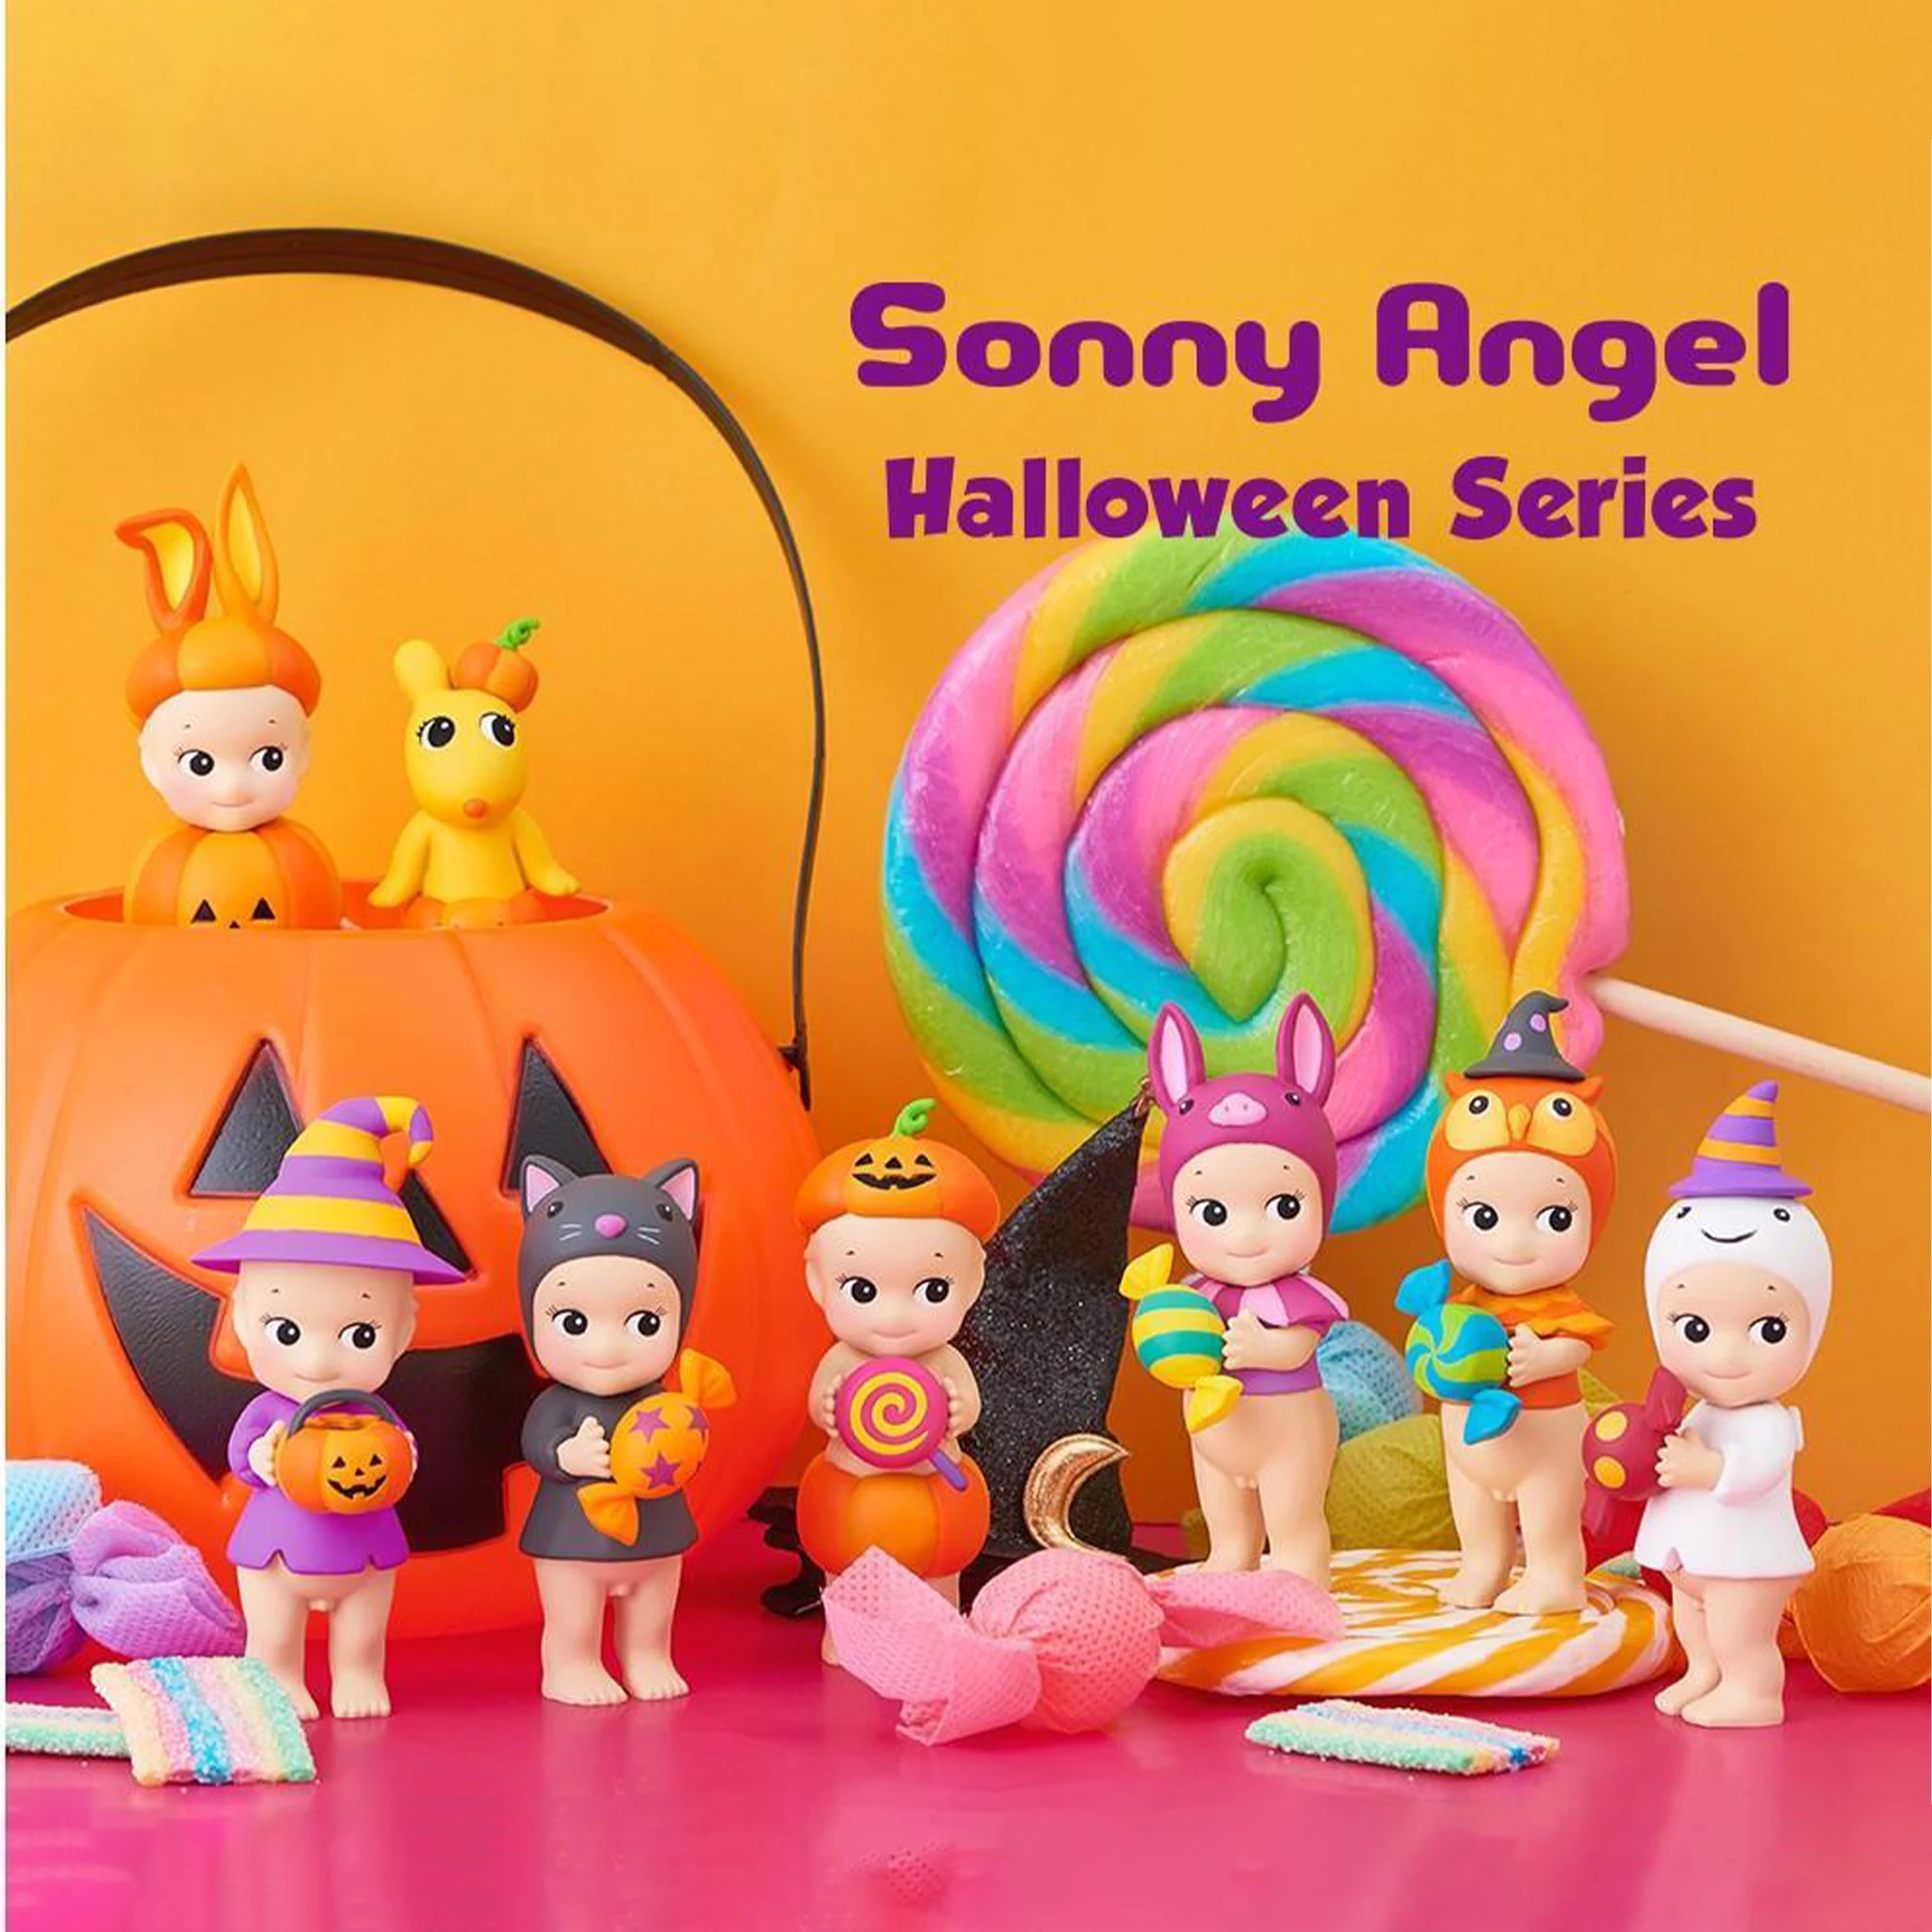 

In Stock Genuine Sonny Angel Halloween Series Blind Box Doll Ghost Pumpkin Rabbit Black Cat Limited Edition Hand Holiday Gift